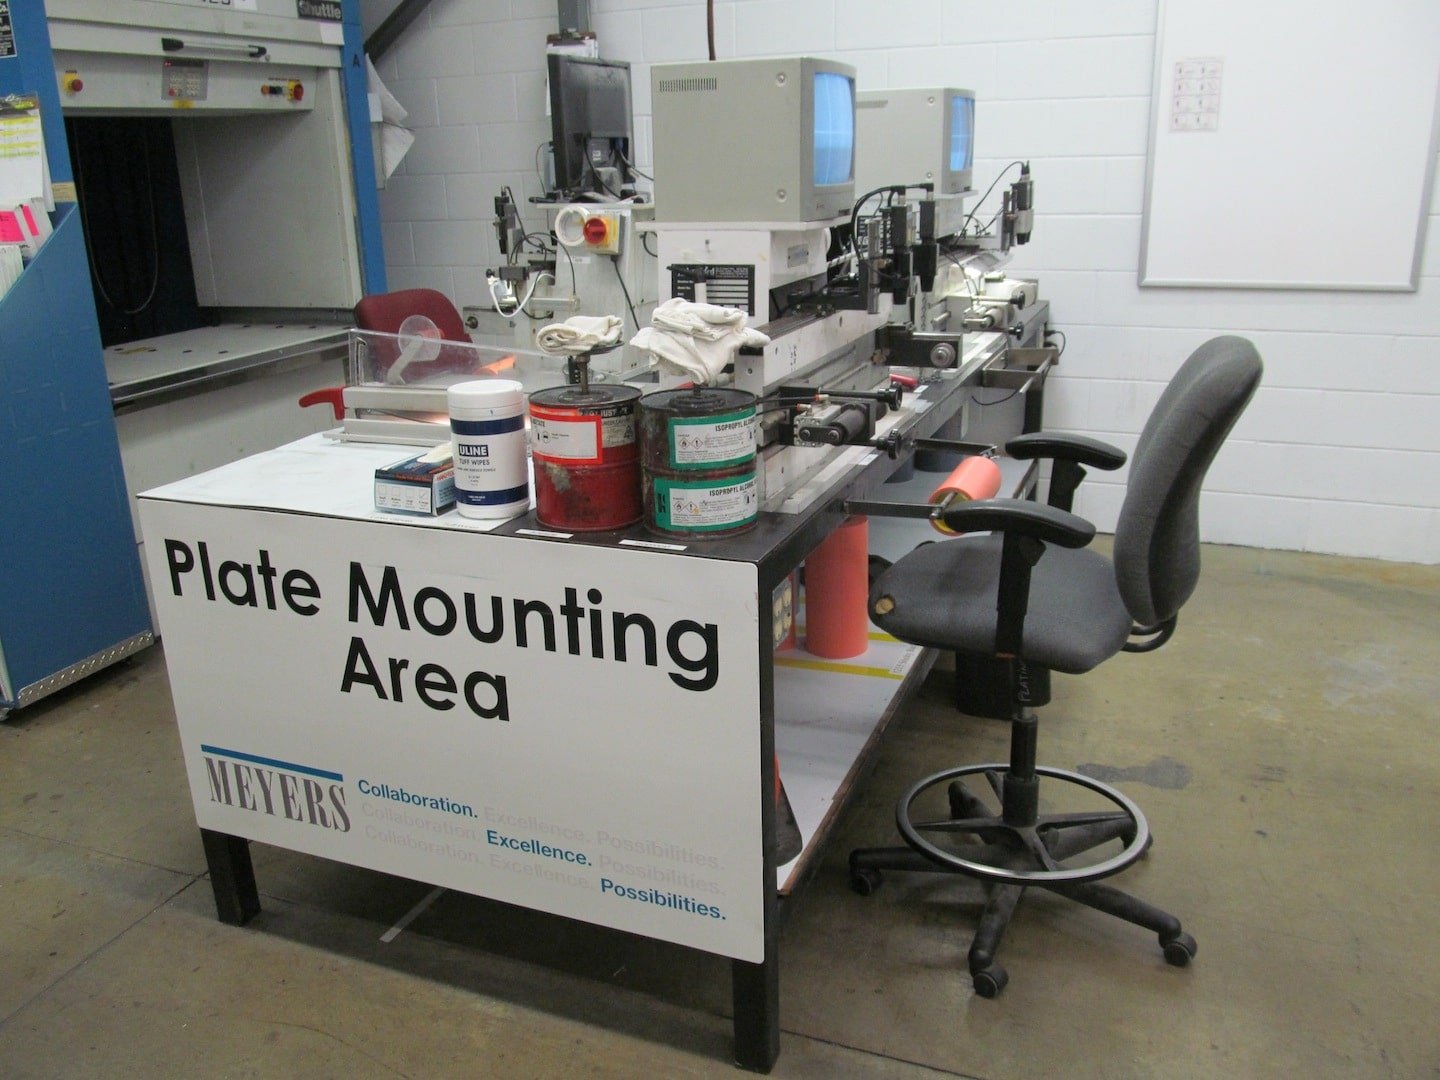 Meyer's plate mounting area